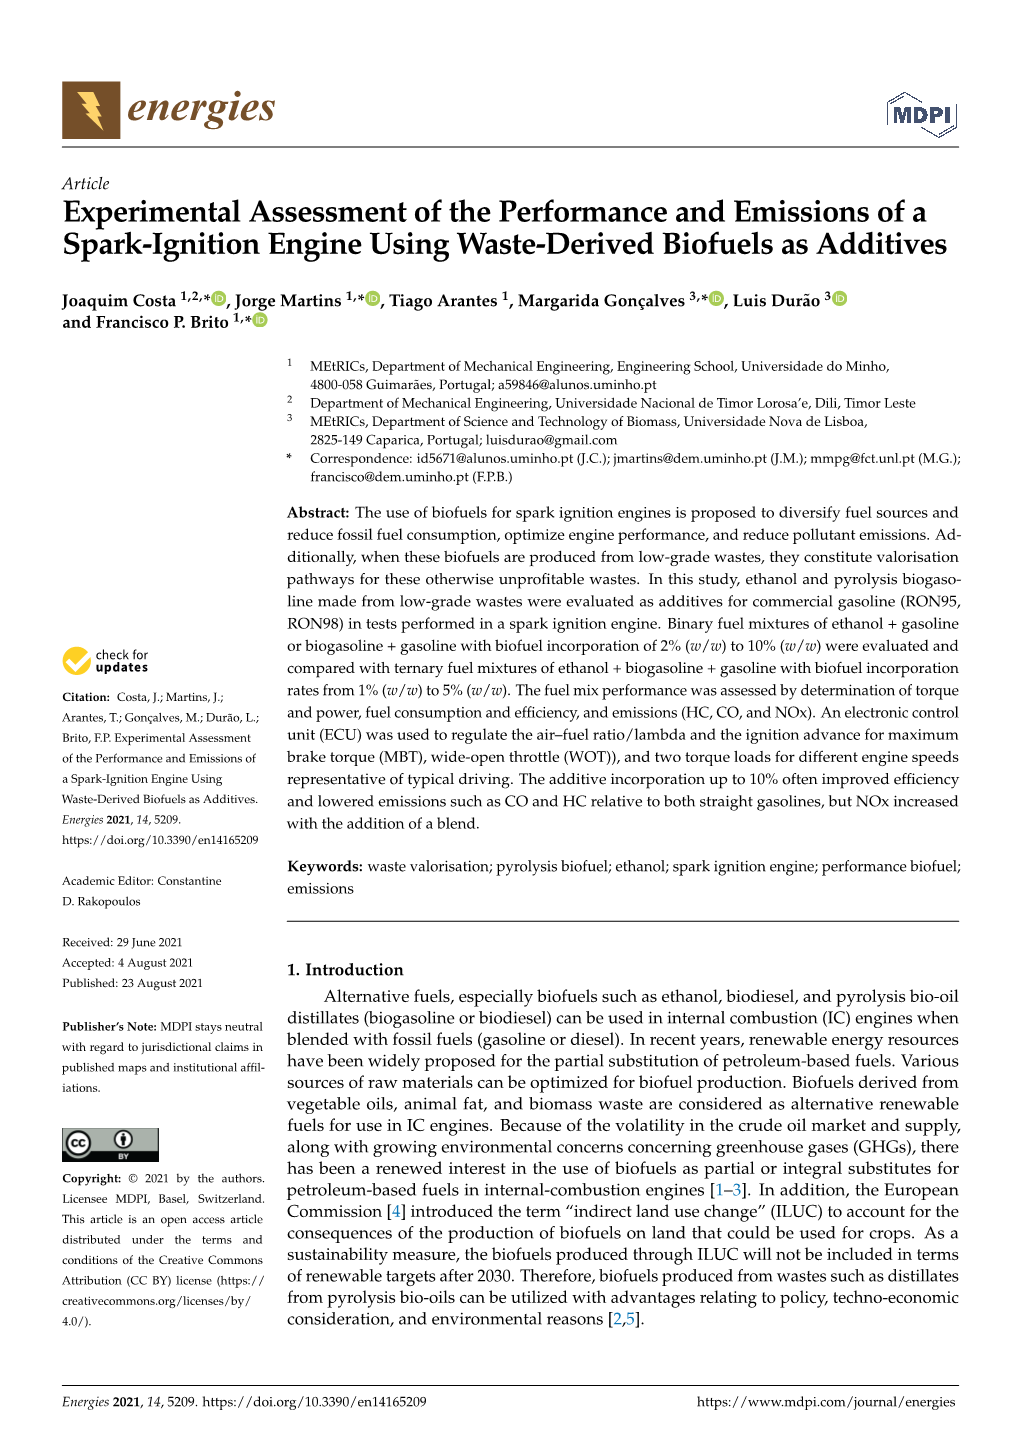 Experimental Assessment of the Performance and Emissions of a Spark-Ignition Engine Using Waste-Derived Biofuels As Additives